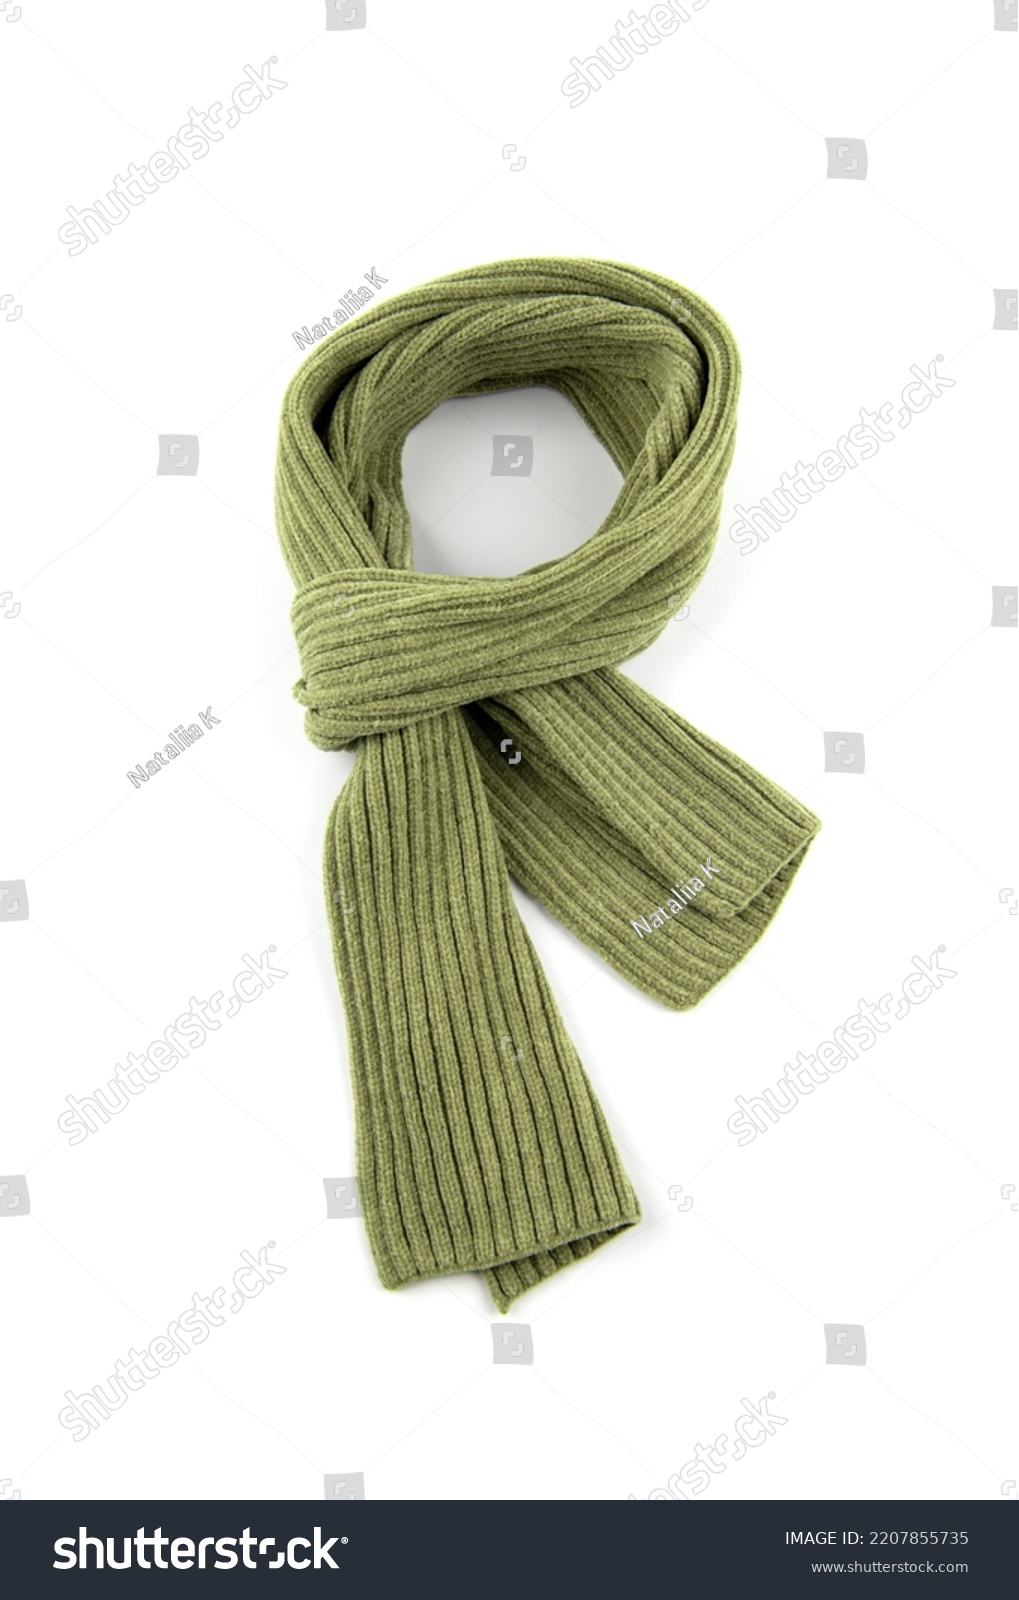 Green scarf on a white background. #2207855735